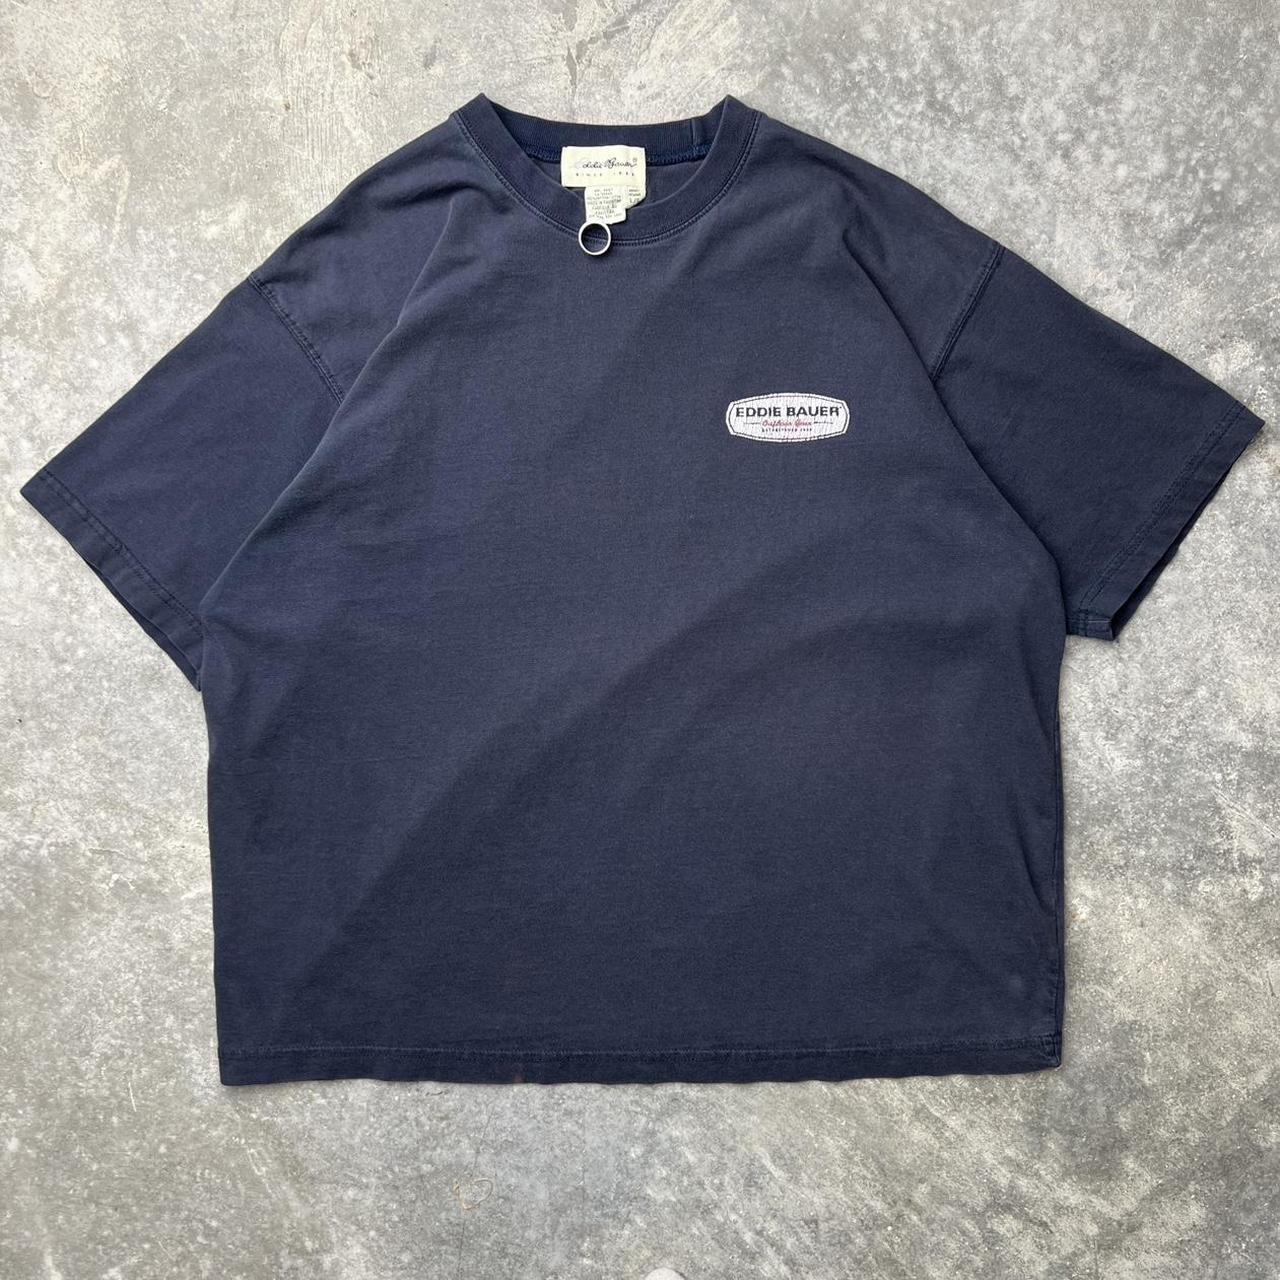 Early 2000’s Eddie Bauer Tee Size Large Great... - Depop